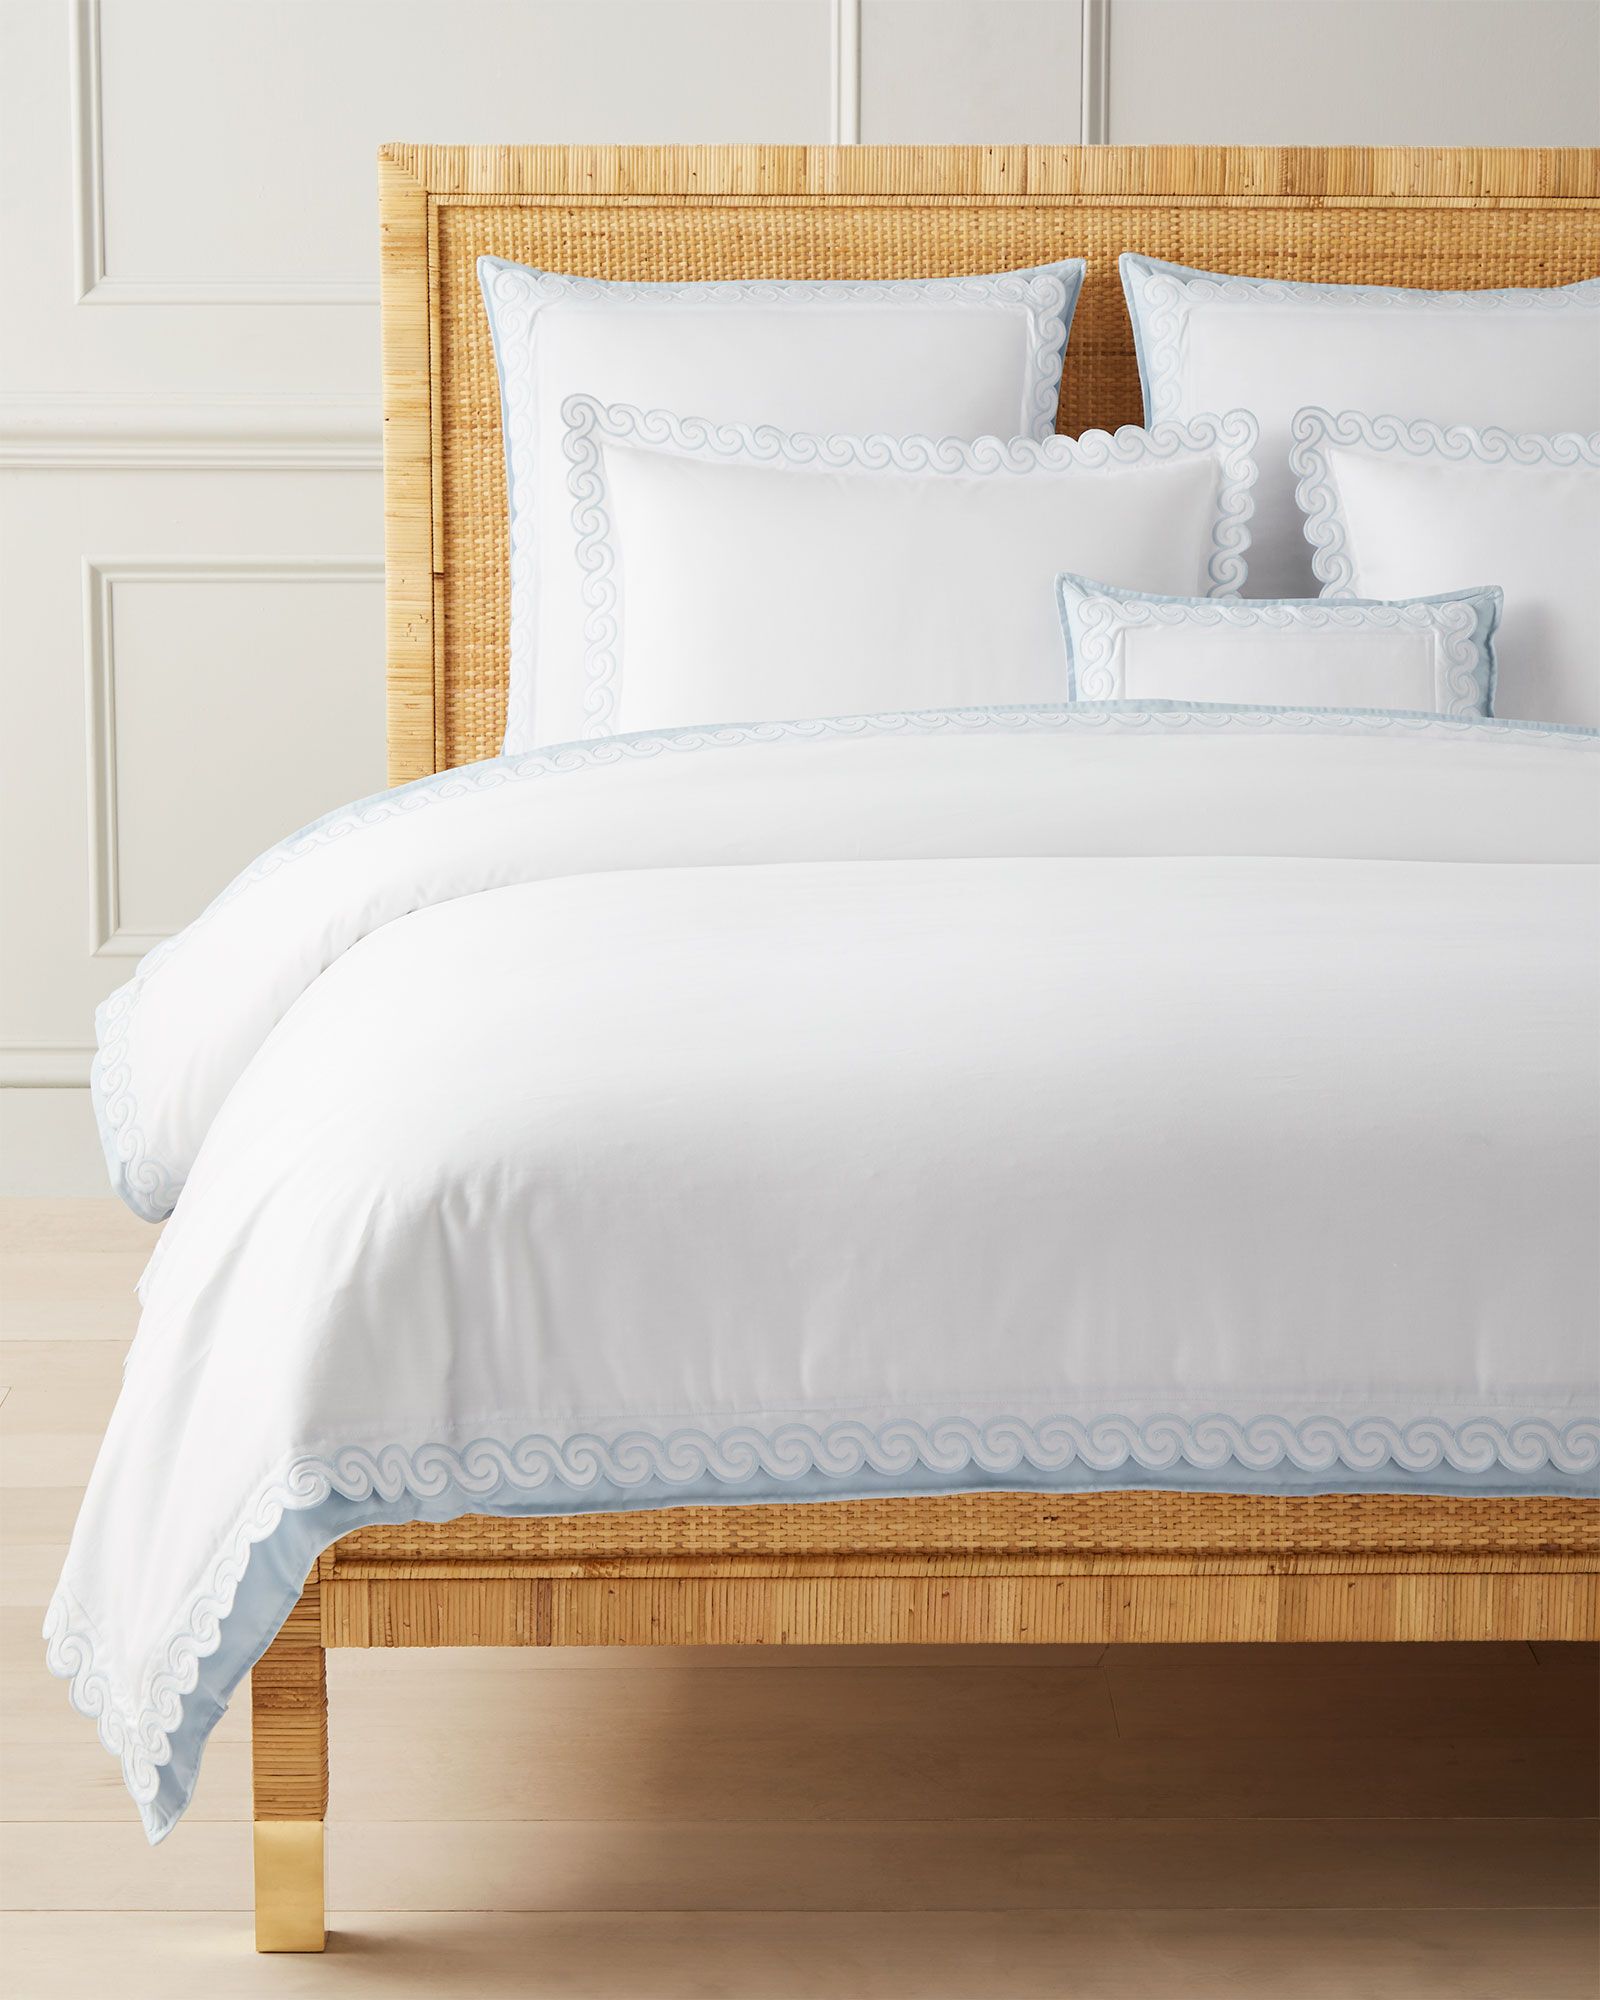 Cape May Duvet Cover | Serena and Lily